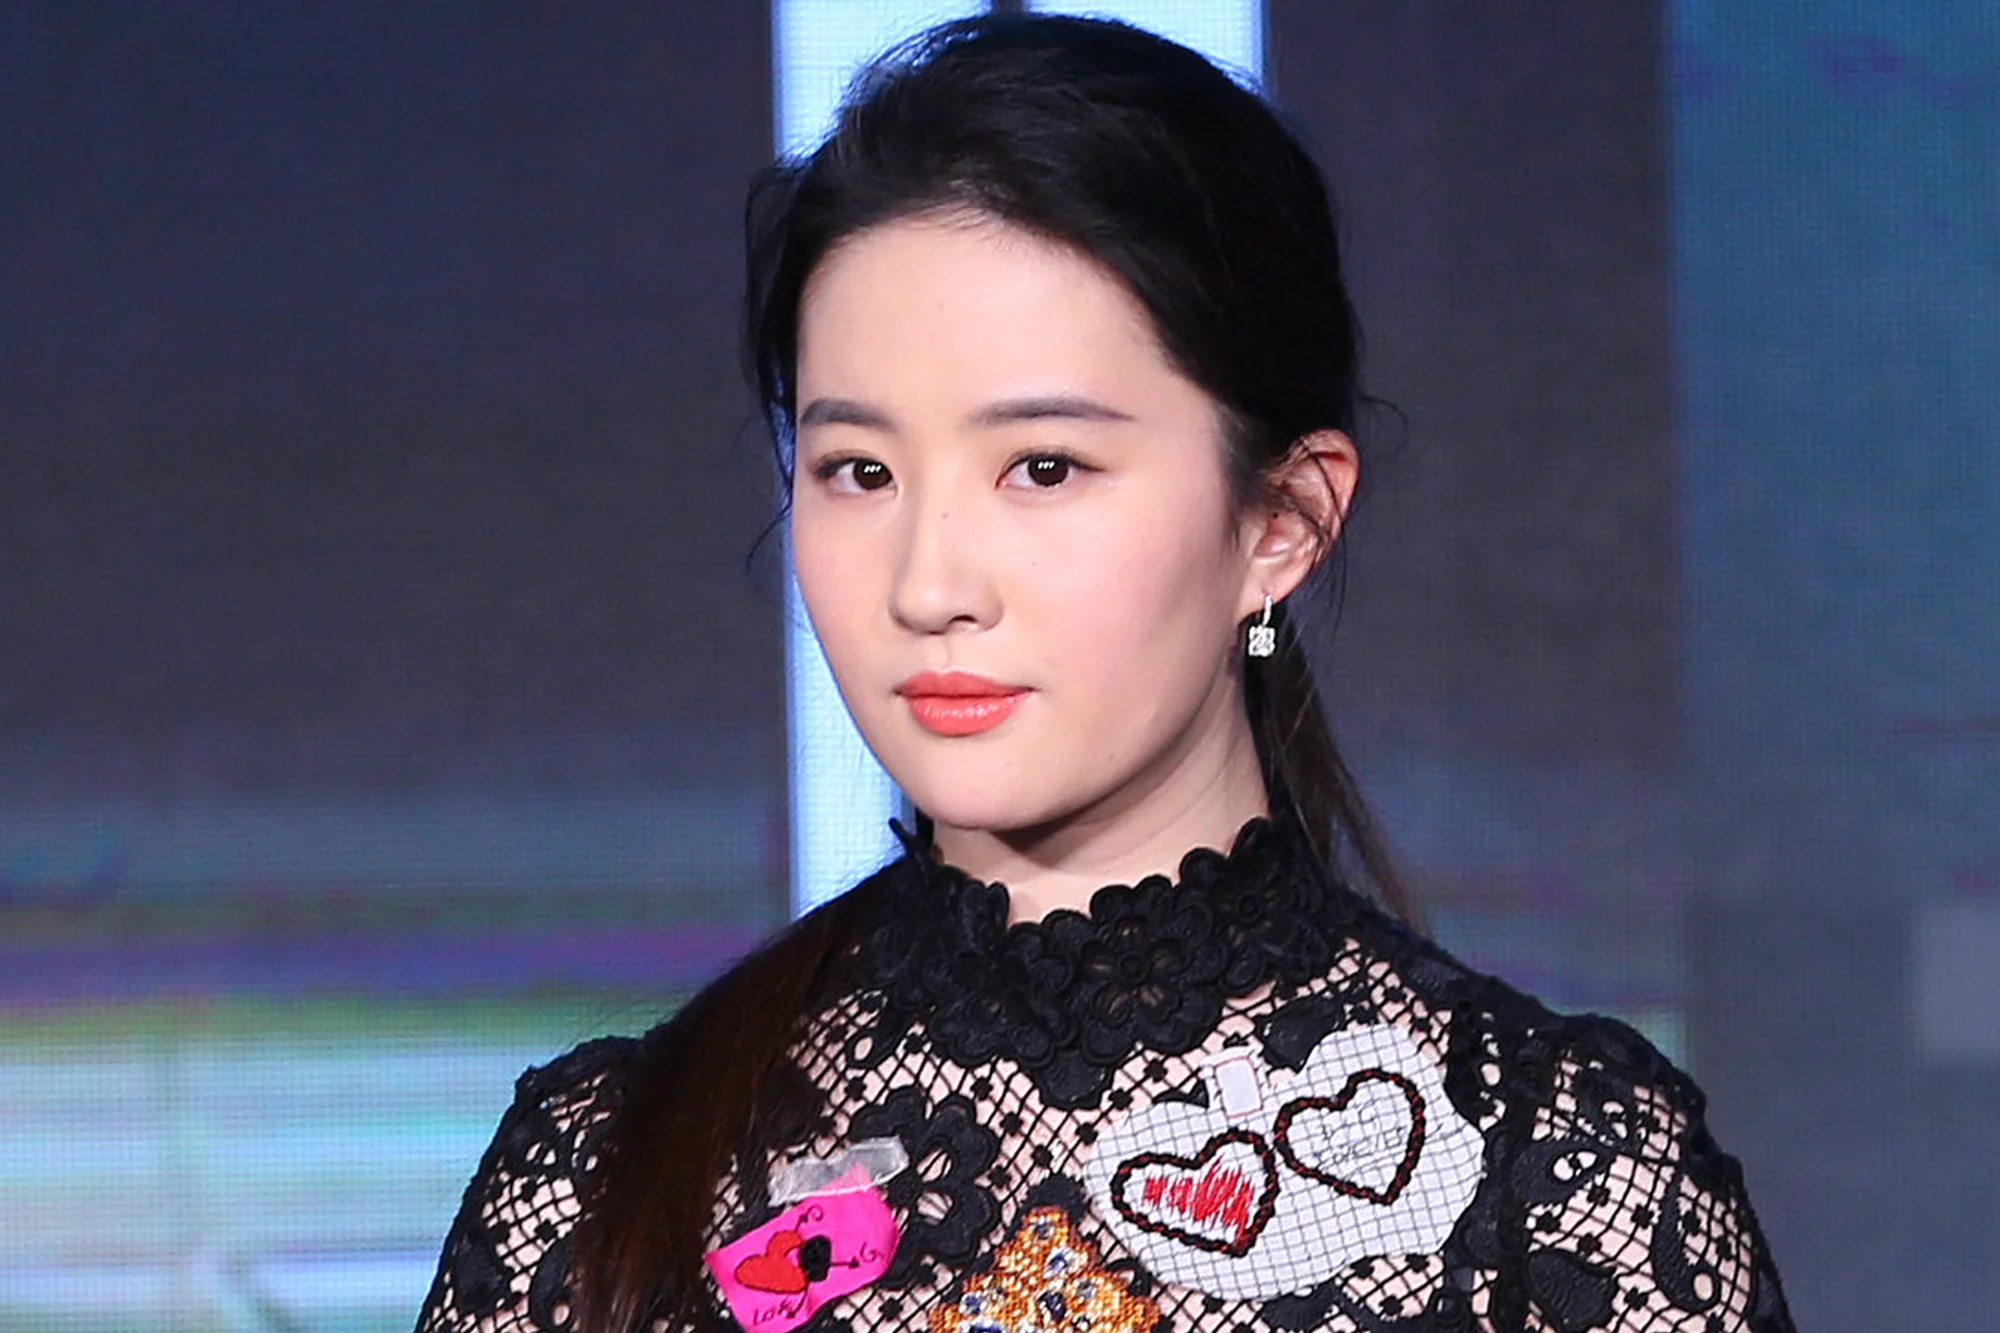 BEIJING, CHINA - DECEMBER 06:  Actress Crystal Liu Yifei attends a press conference of director Xiao Yang's film 'Hanson and the Beast' on December 6, 2017 in Beijing, China.  (Photo by VCG/VCG via Getty Images)